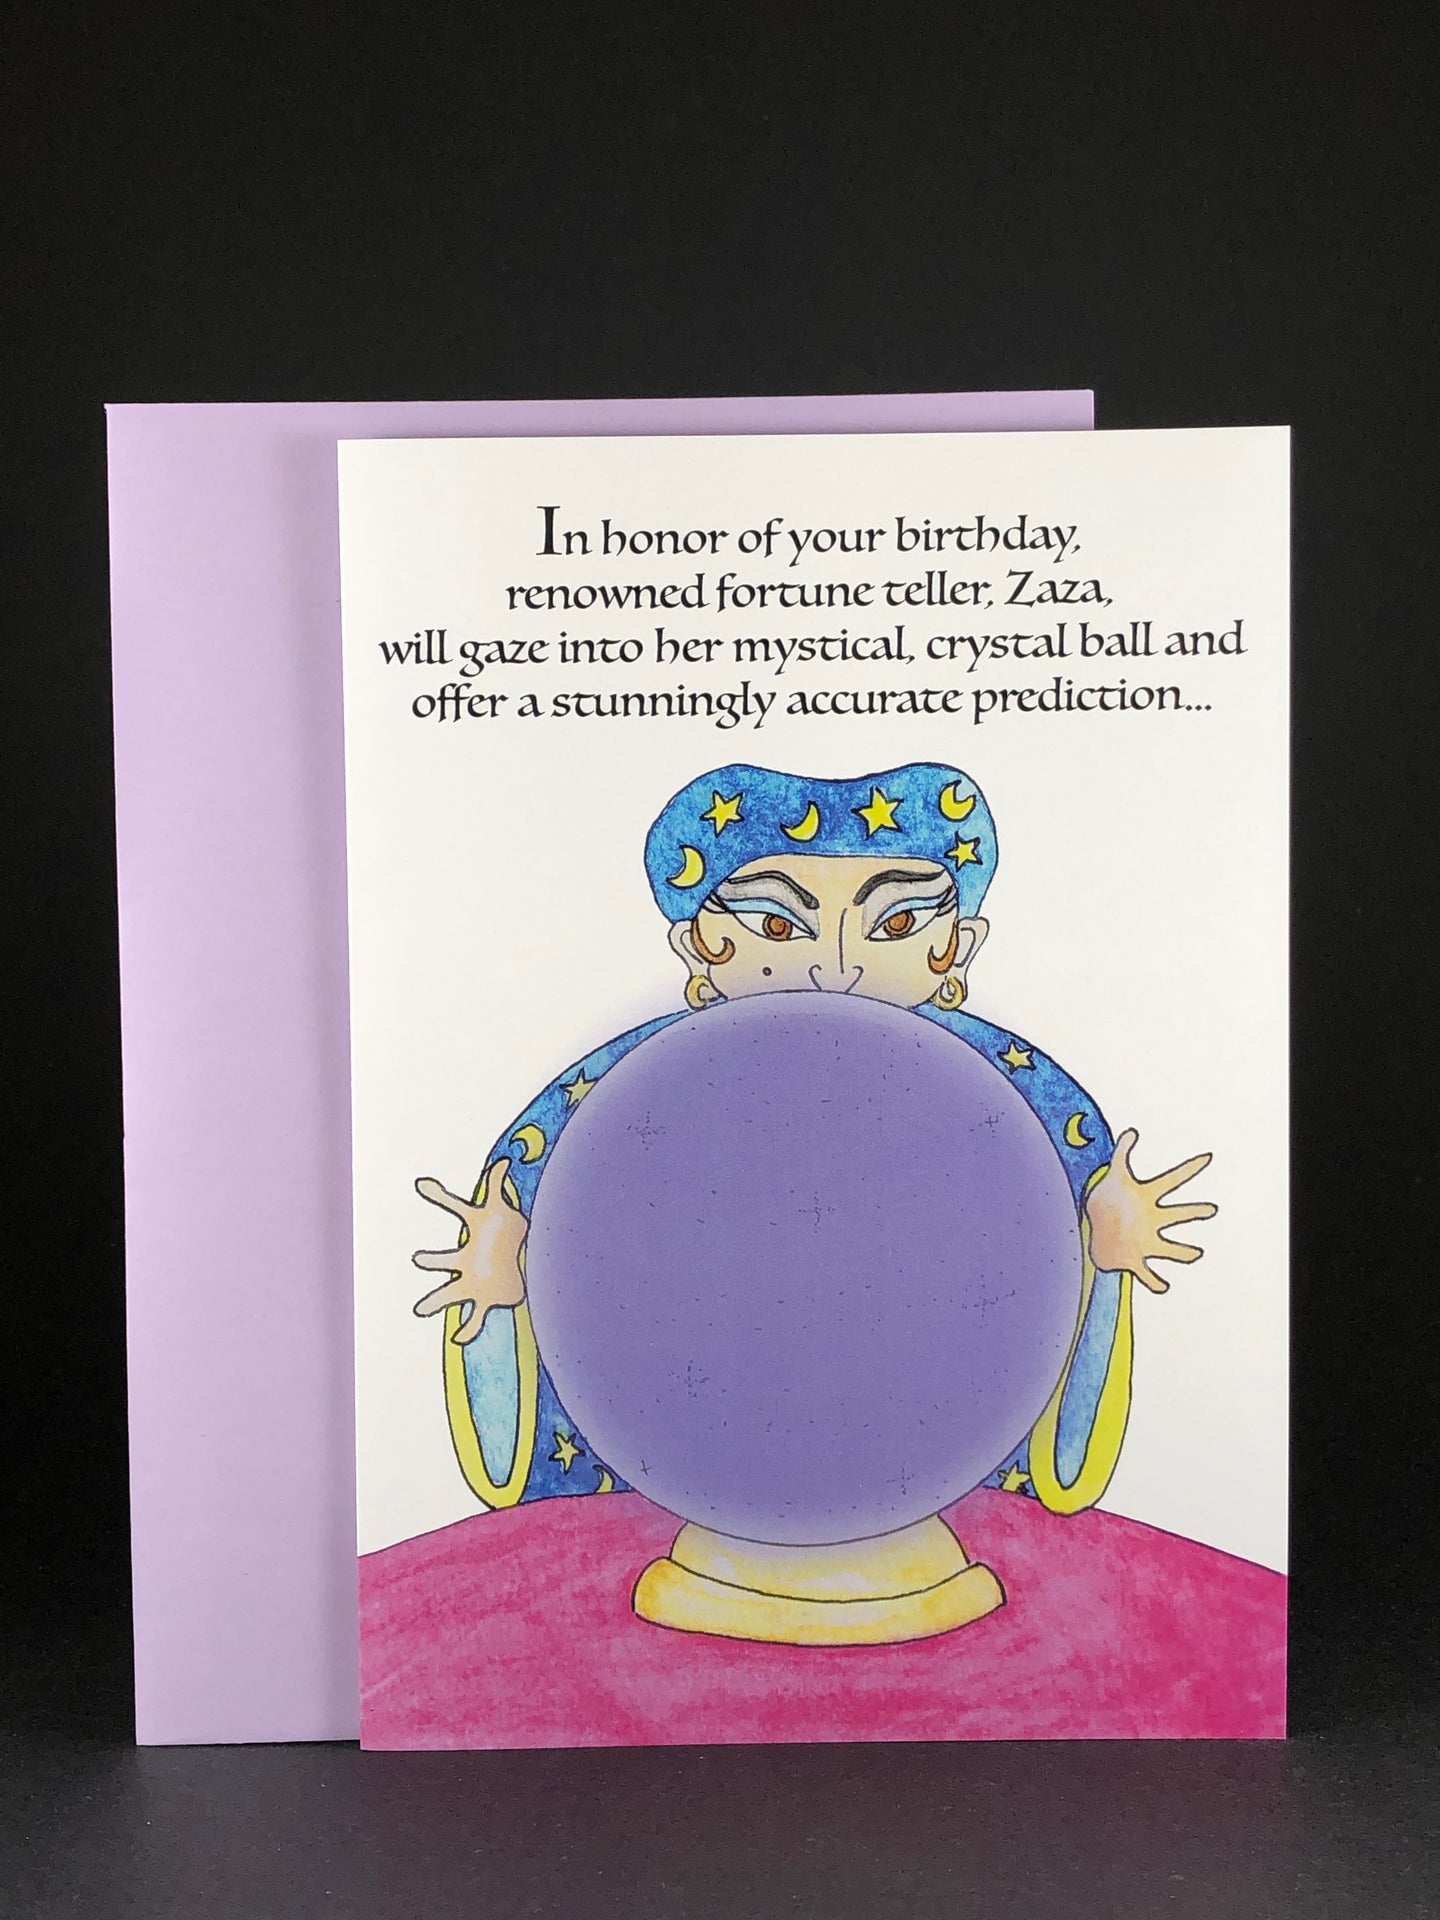 In honor of your birthday, renowned fortune teller, Zaza, will gaze into her mystical, crystal ball and offer a stunningly accurate prediction...